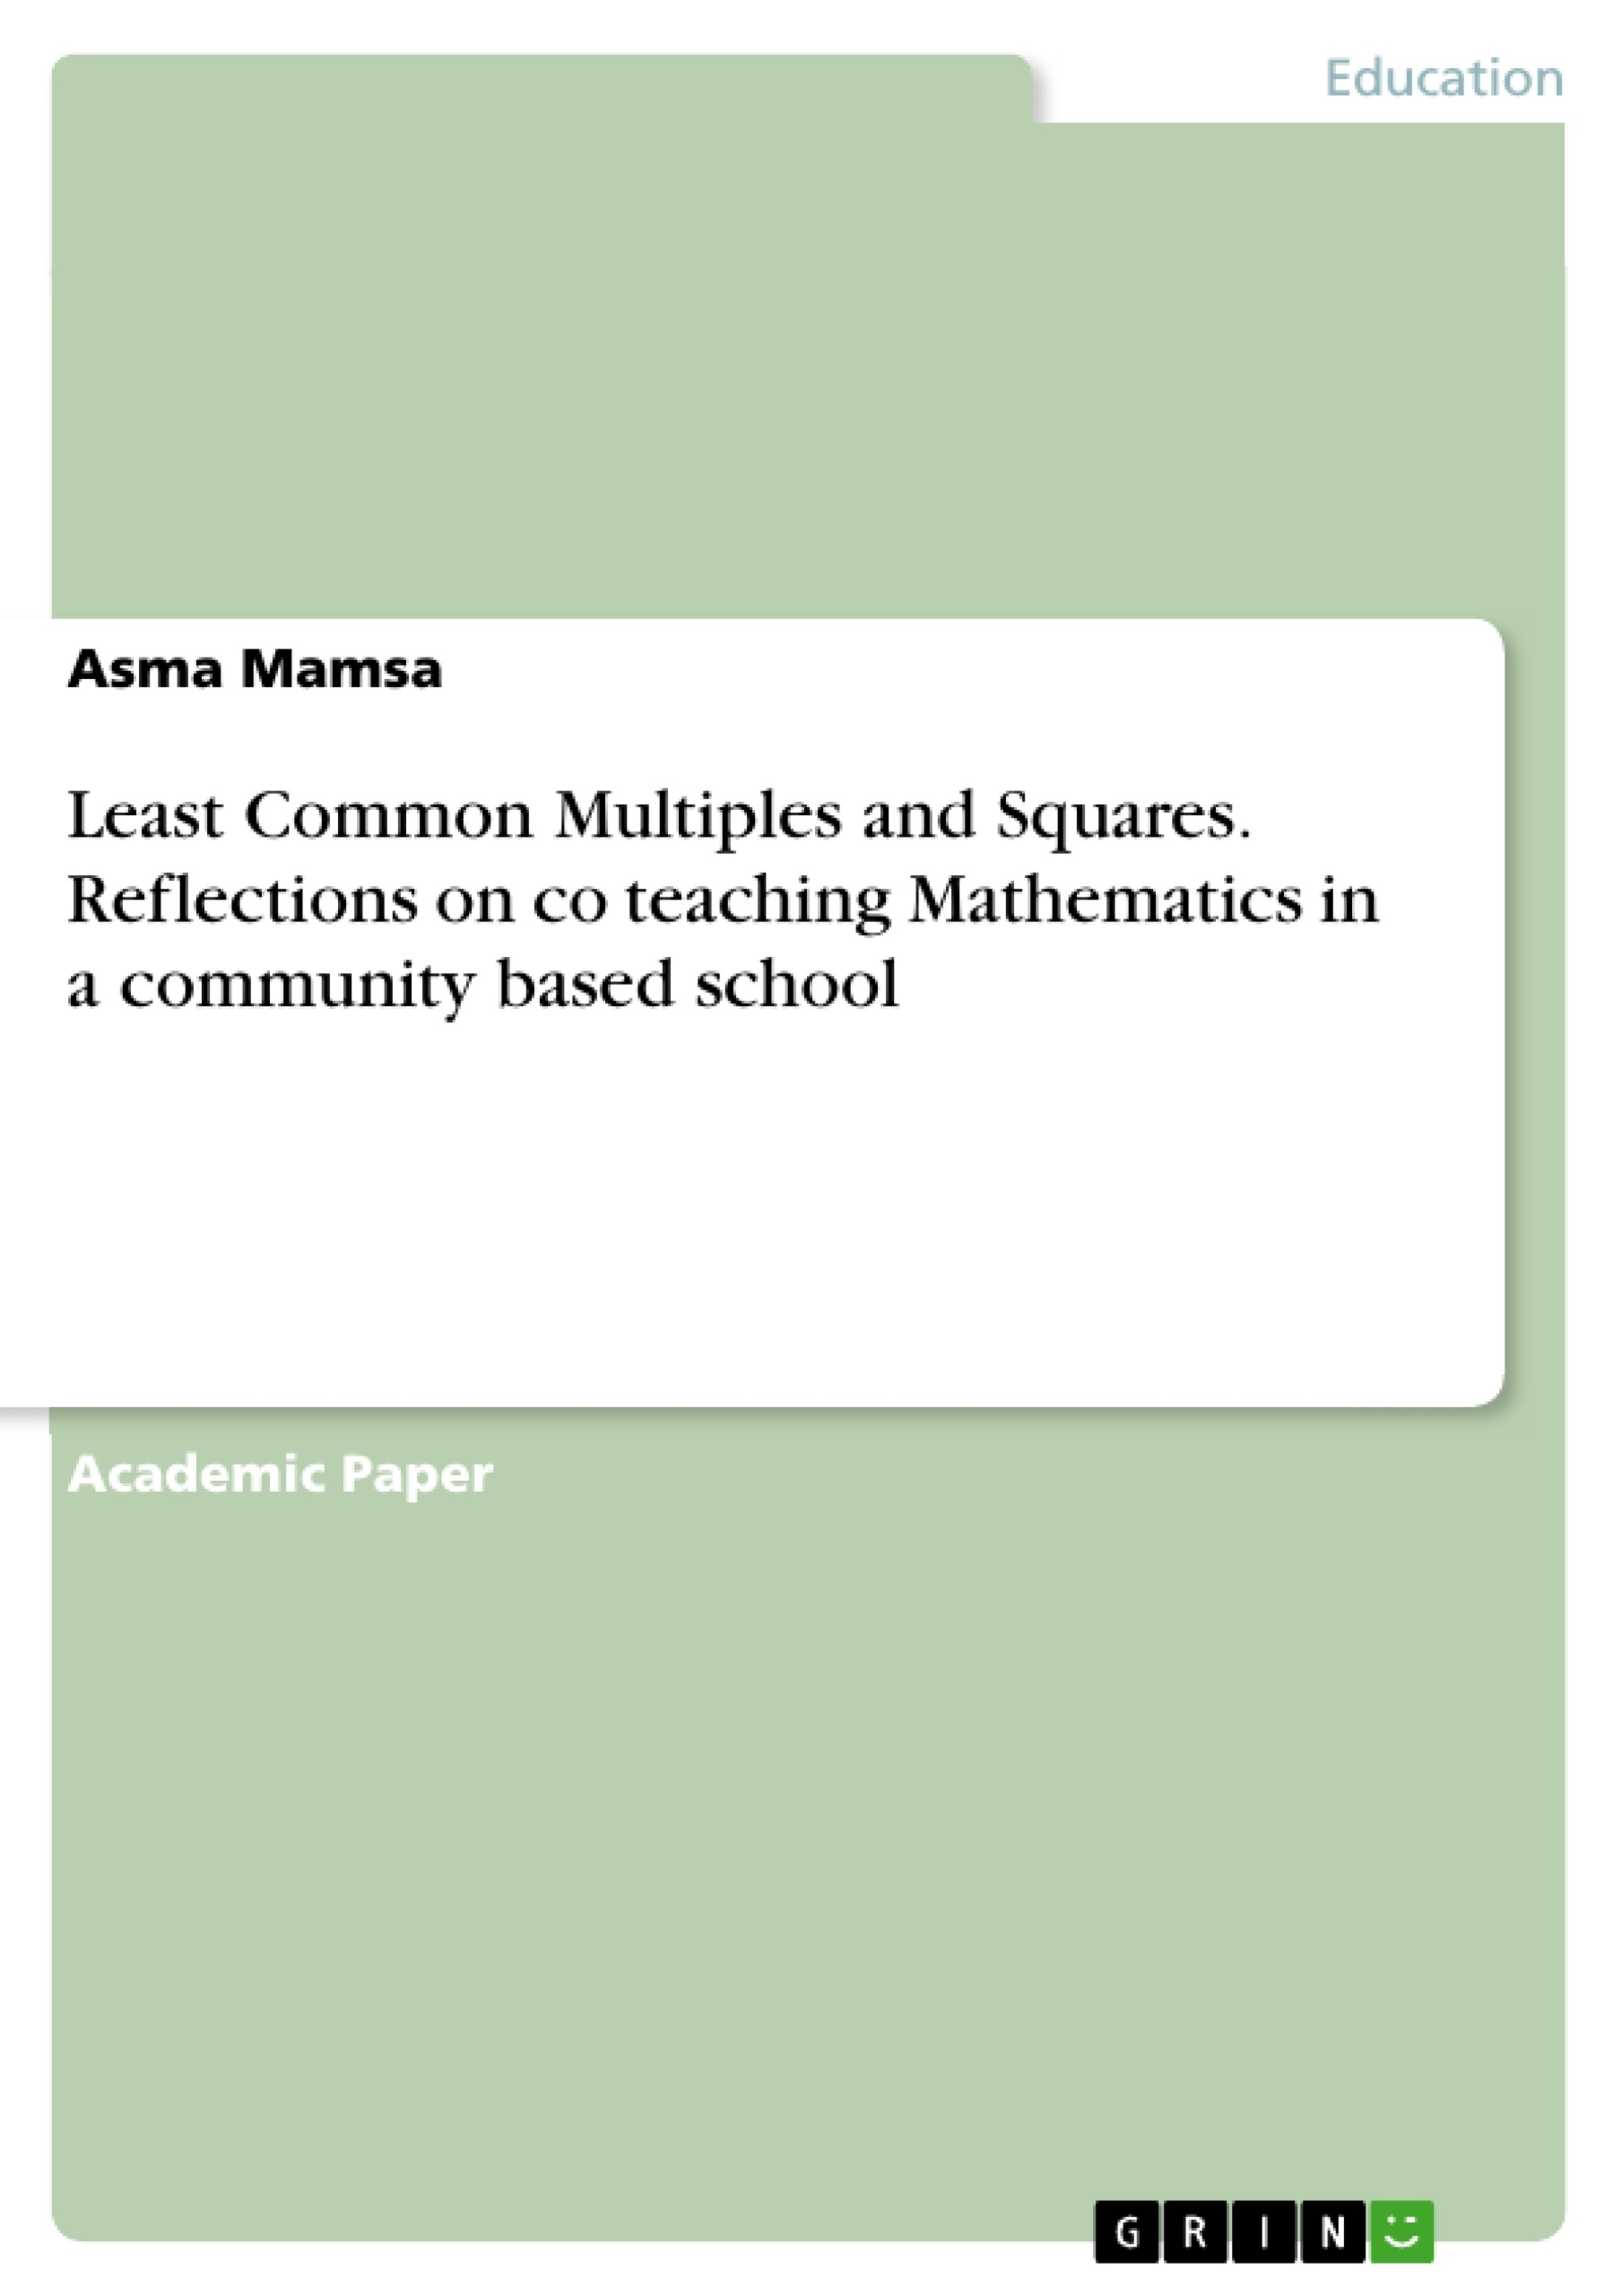 Title: Least Common Multiples and Squares. Reflections on co teaching Mathematics in a community based school